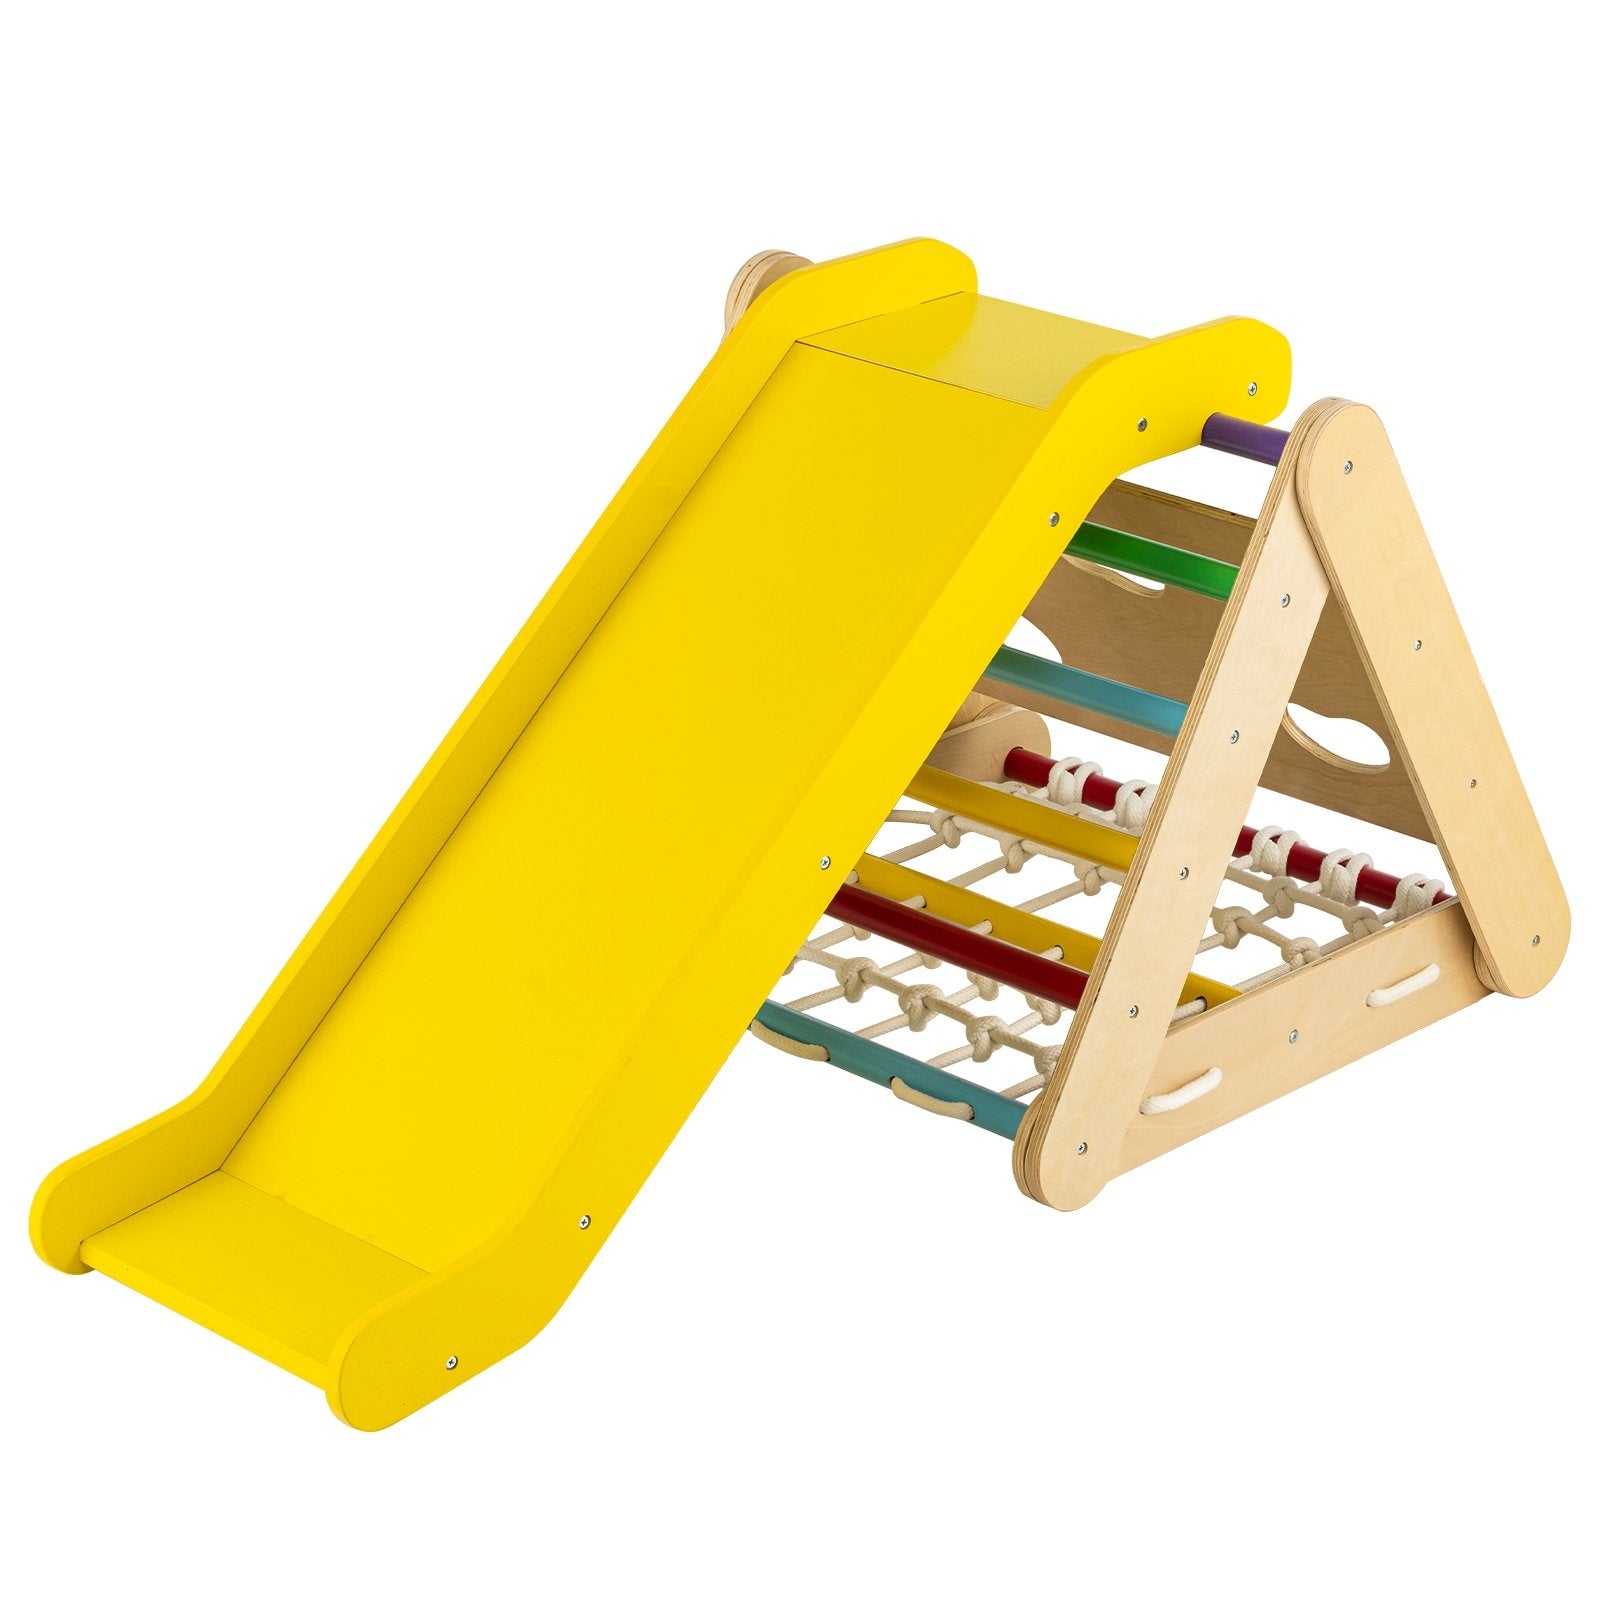 4 in 1 Triangle Climber Toy with Sliding Board and Climbing Net, Multicolor - Gallery Canada